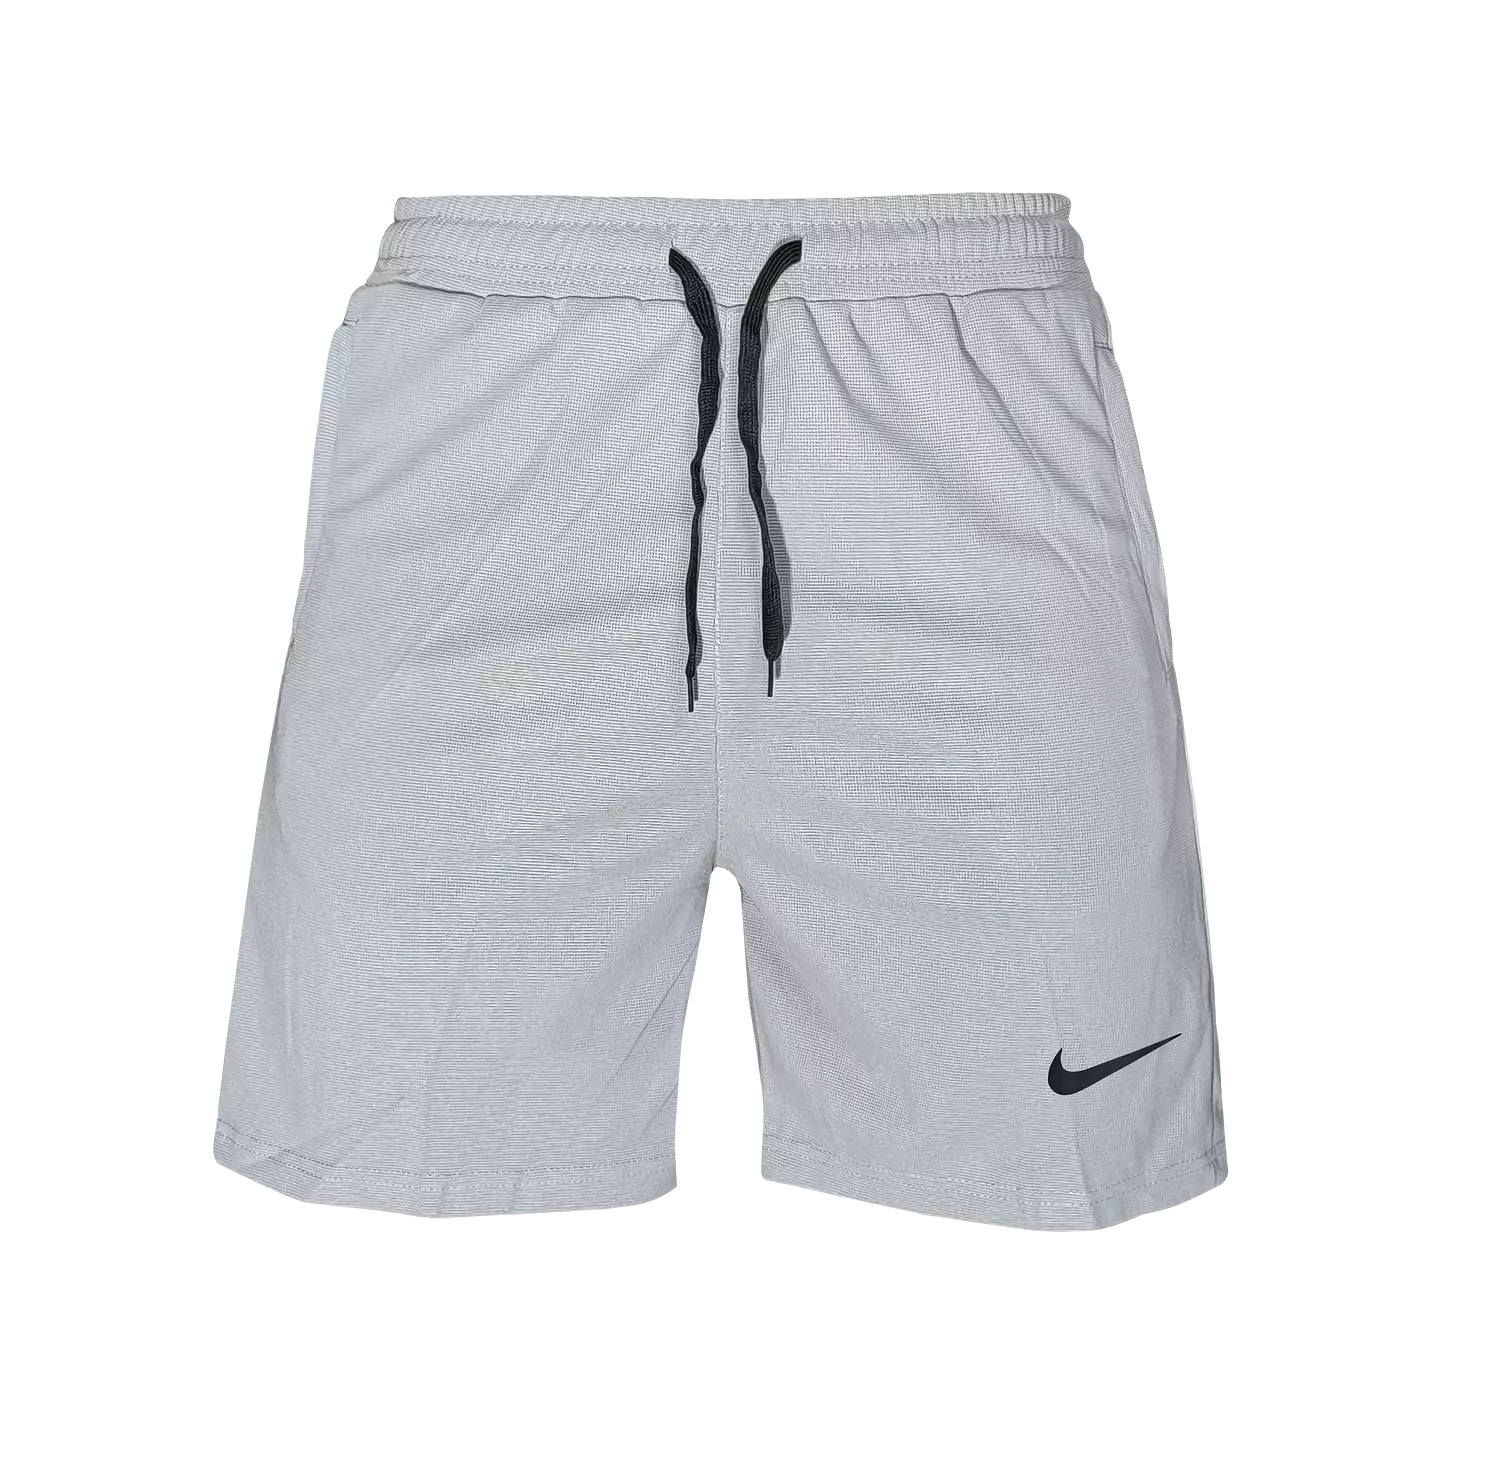 <p><strong>NIKE</strong></p><p><span style="color: rgb(128, 128, 128)">TRAINING SHORT</span></p>